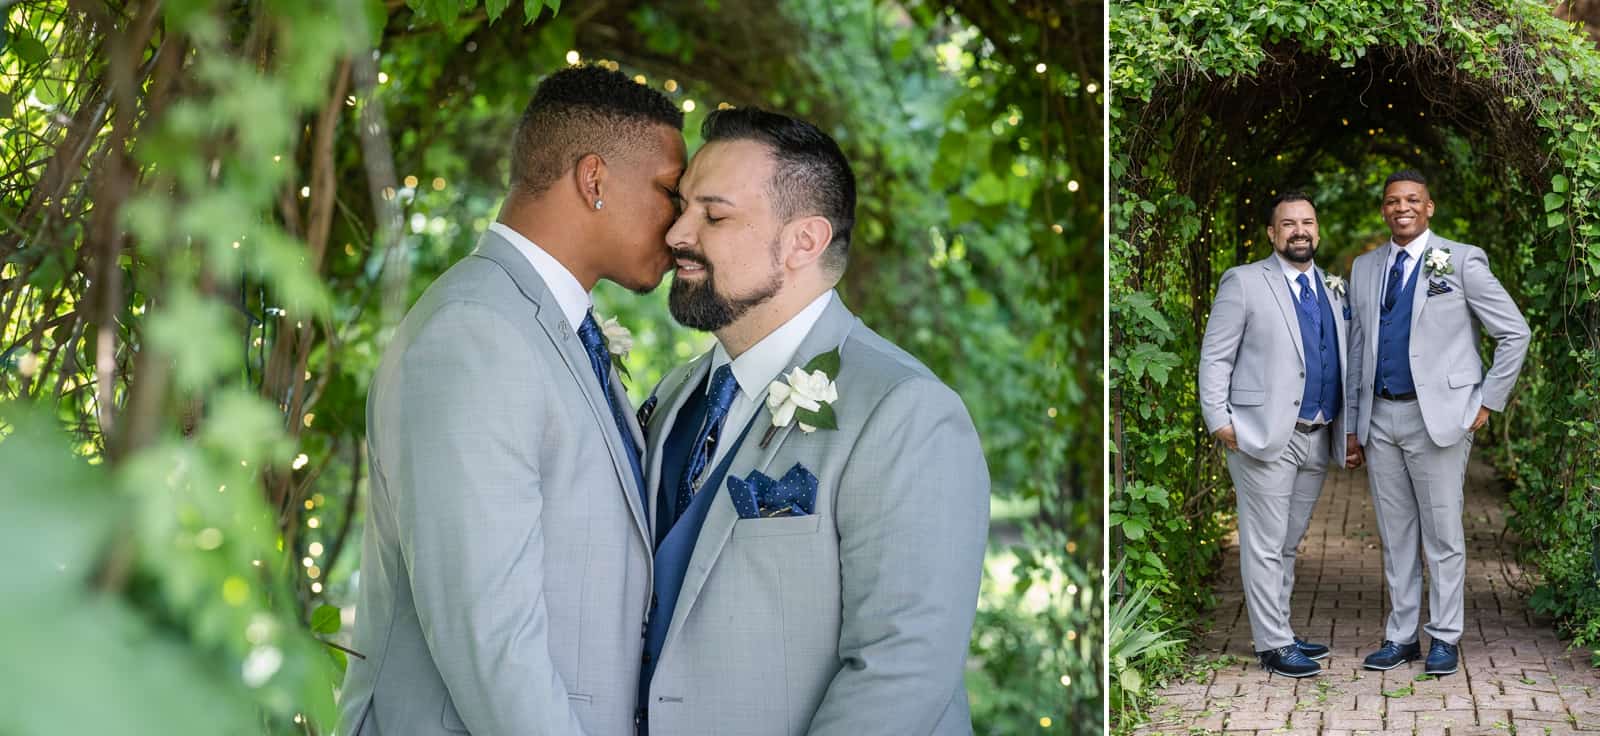 Male same-sex couple portraits under arbor and twinkle lights